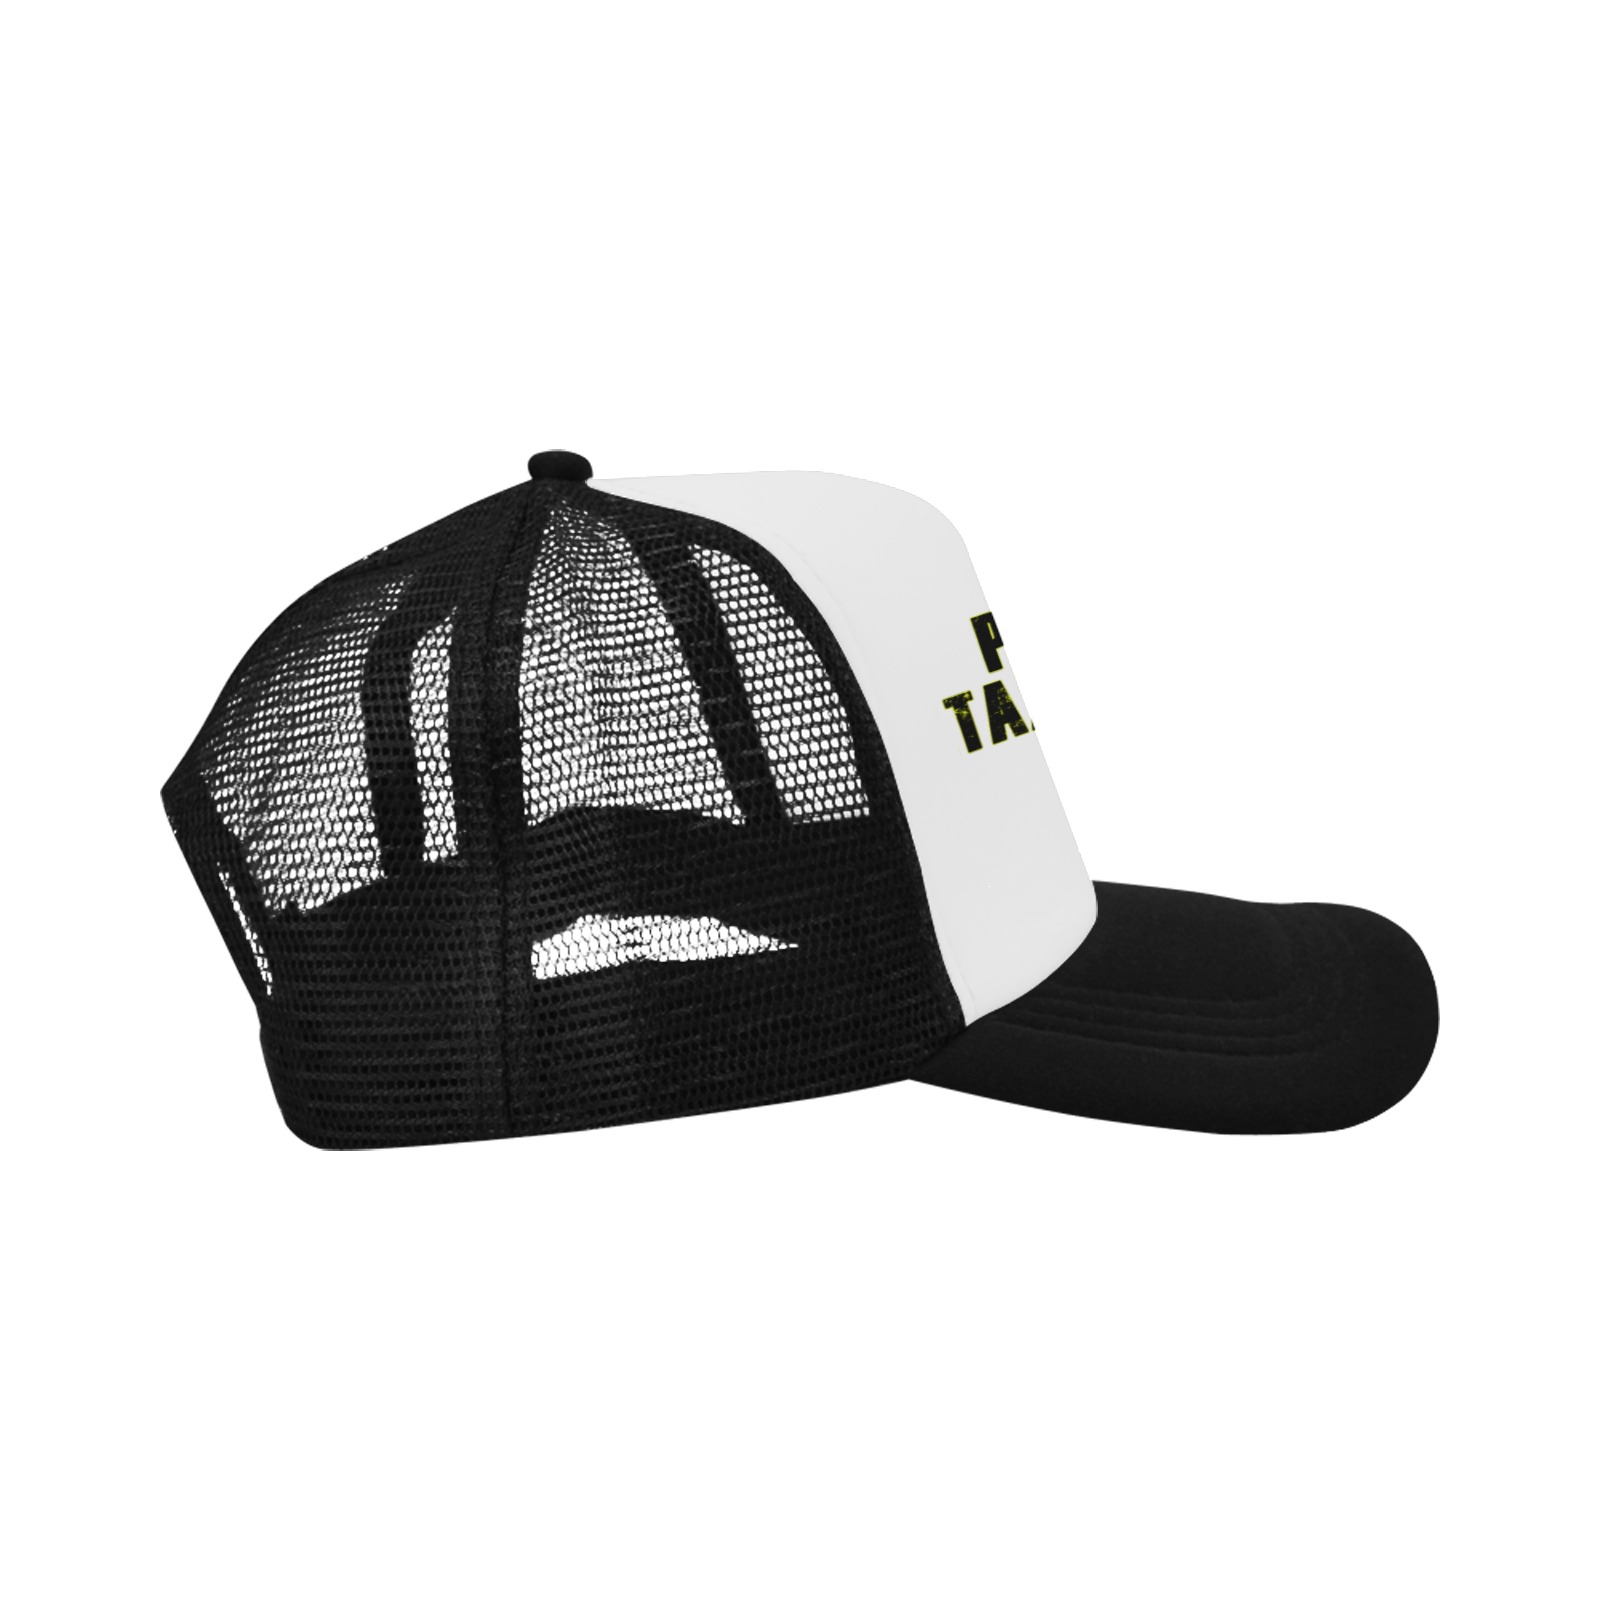 Personal Taxi Service Trucker Hat